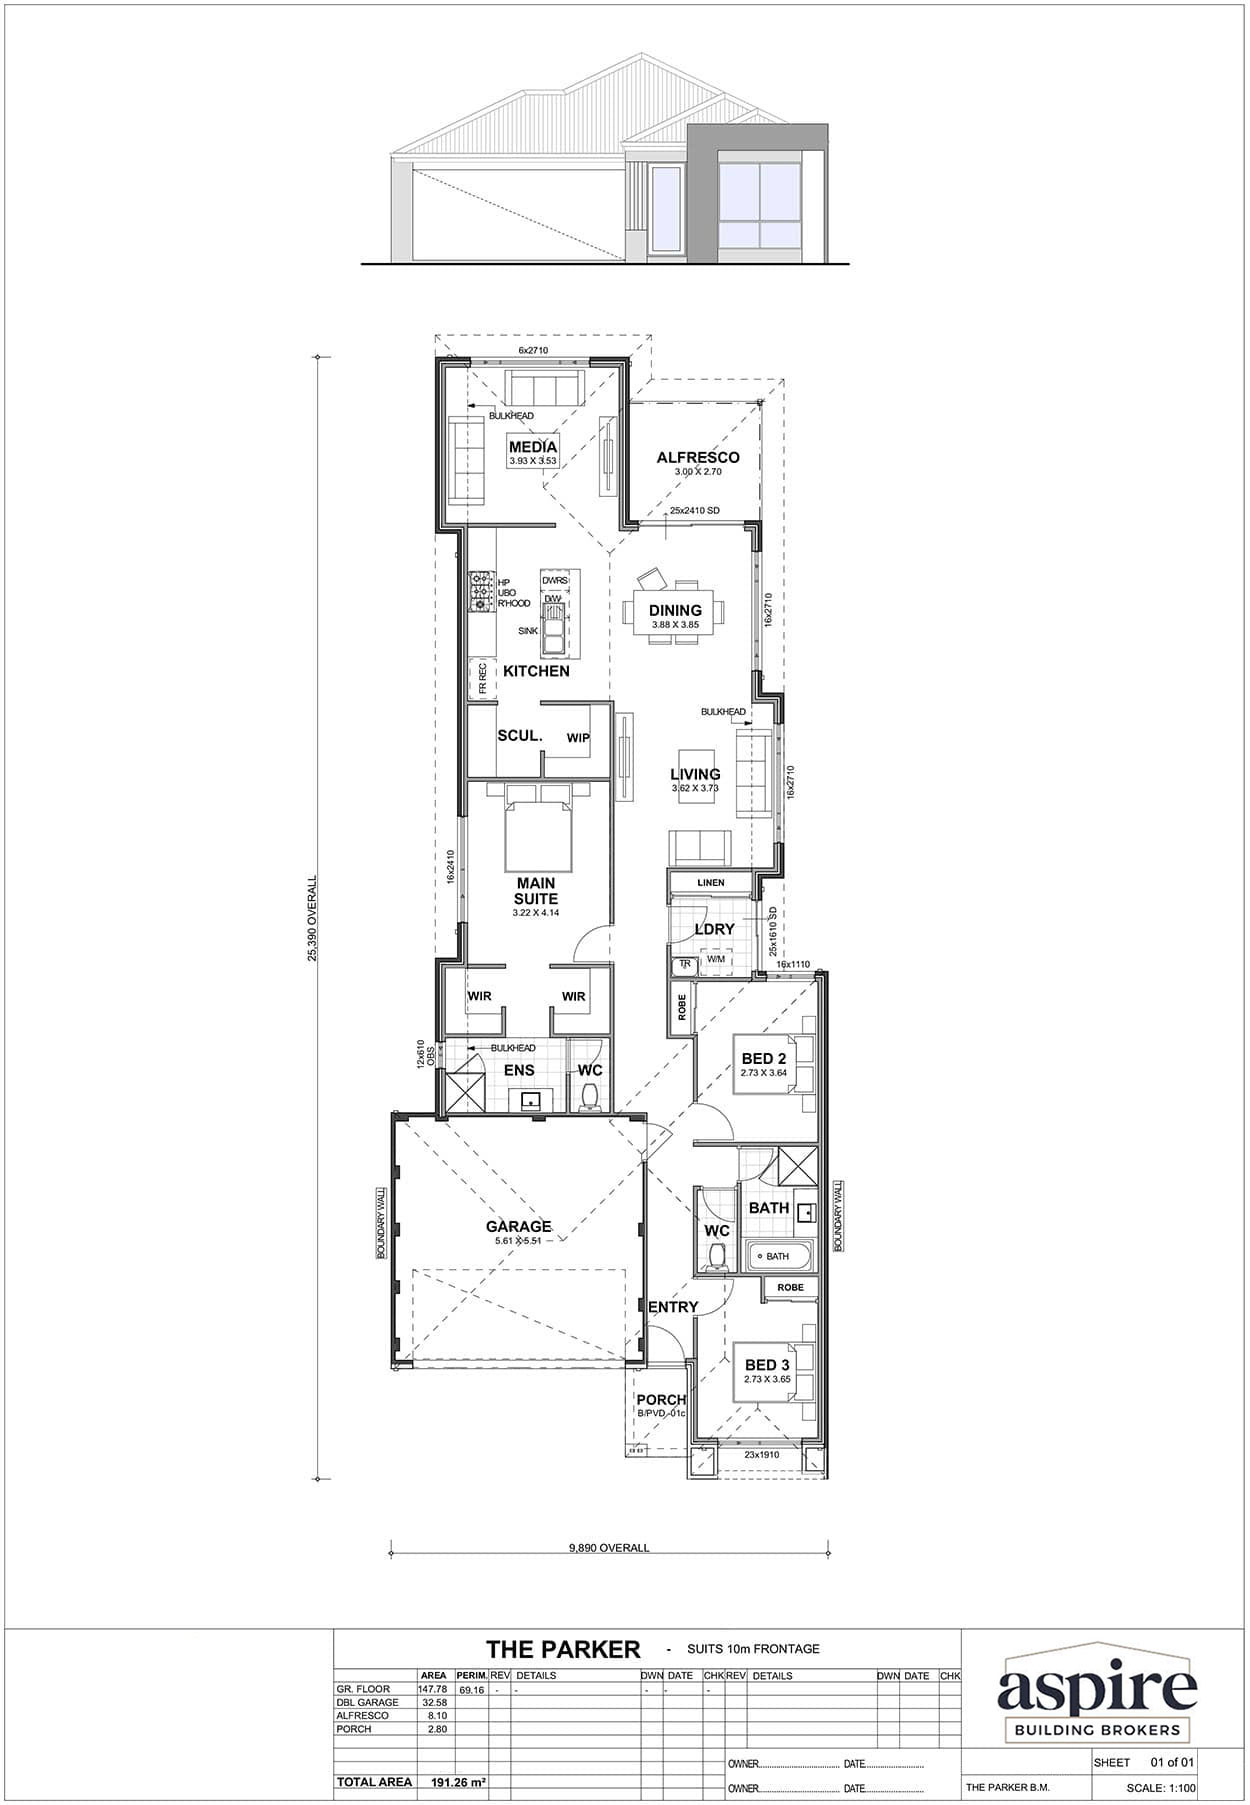 The Parker Floor Plan - Perth New Build Home Designs. 3 Bedrooms, suited for narrow blocks. Aspire Building Brokers